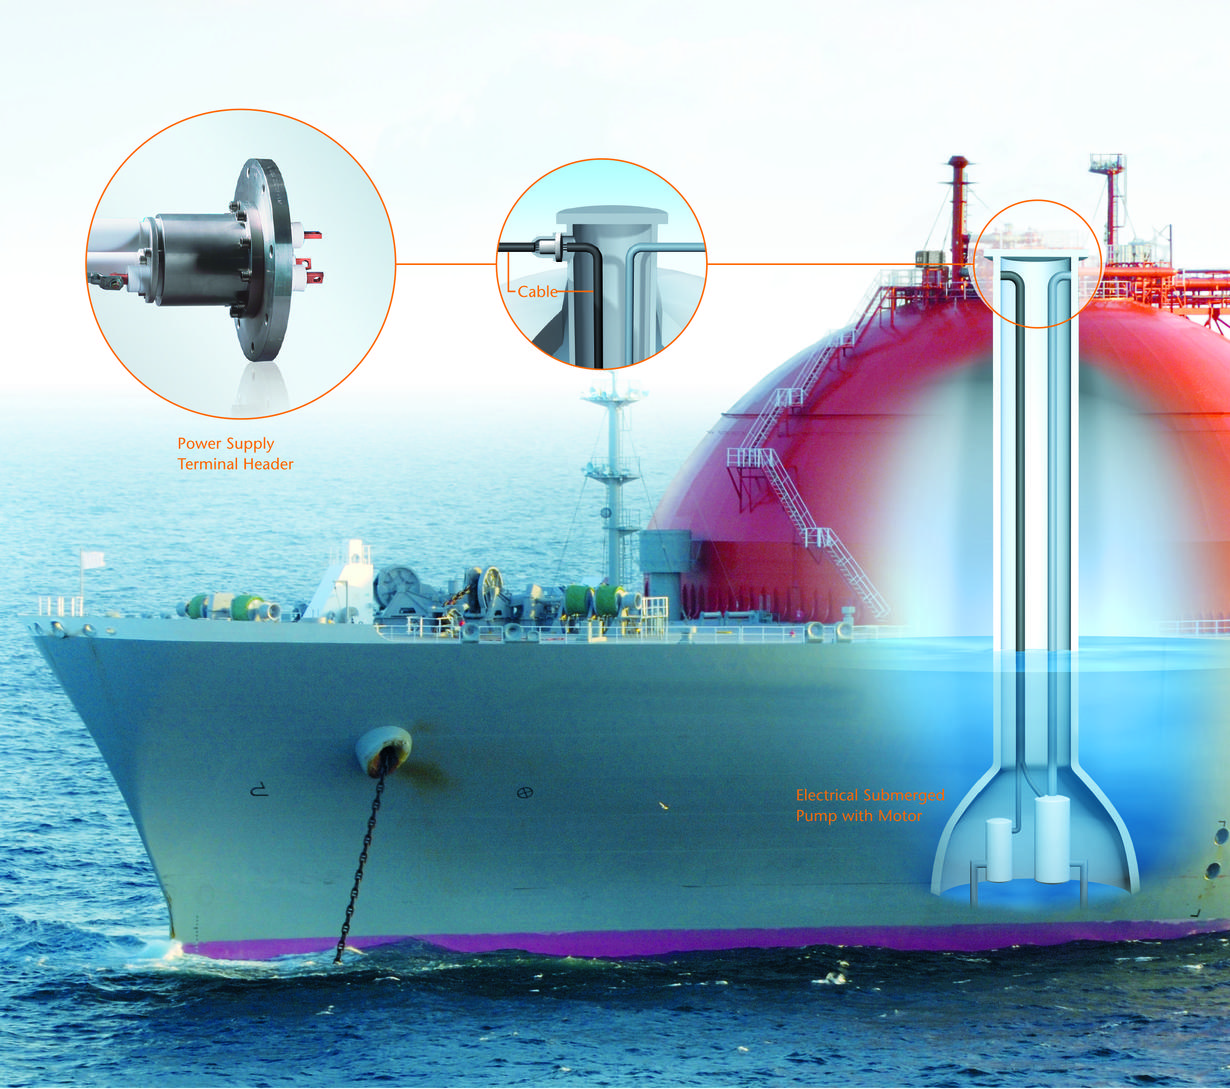 Illustration of submerged pumps in an LNG transportation carrier